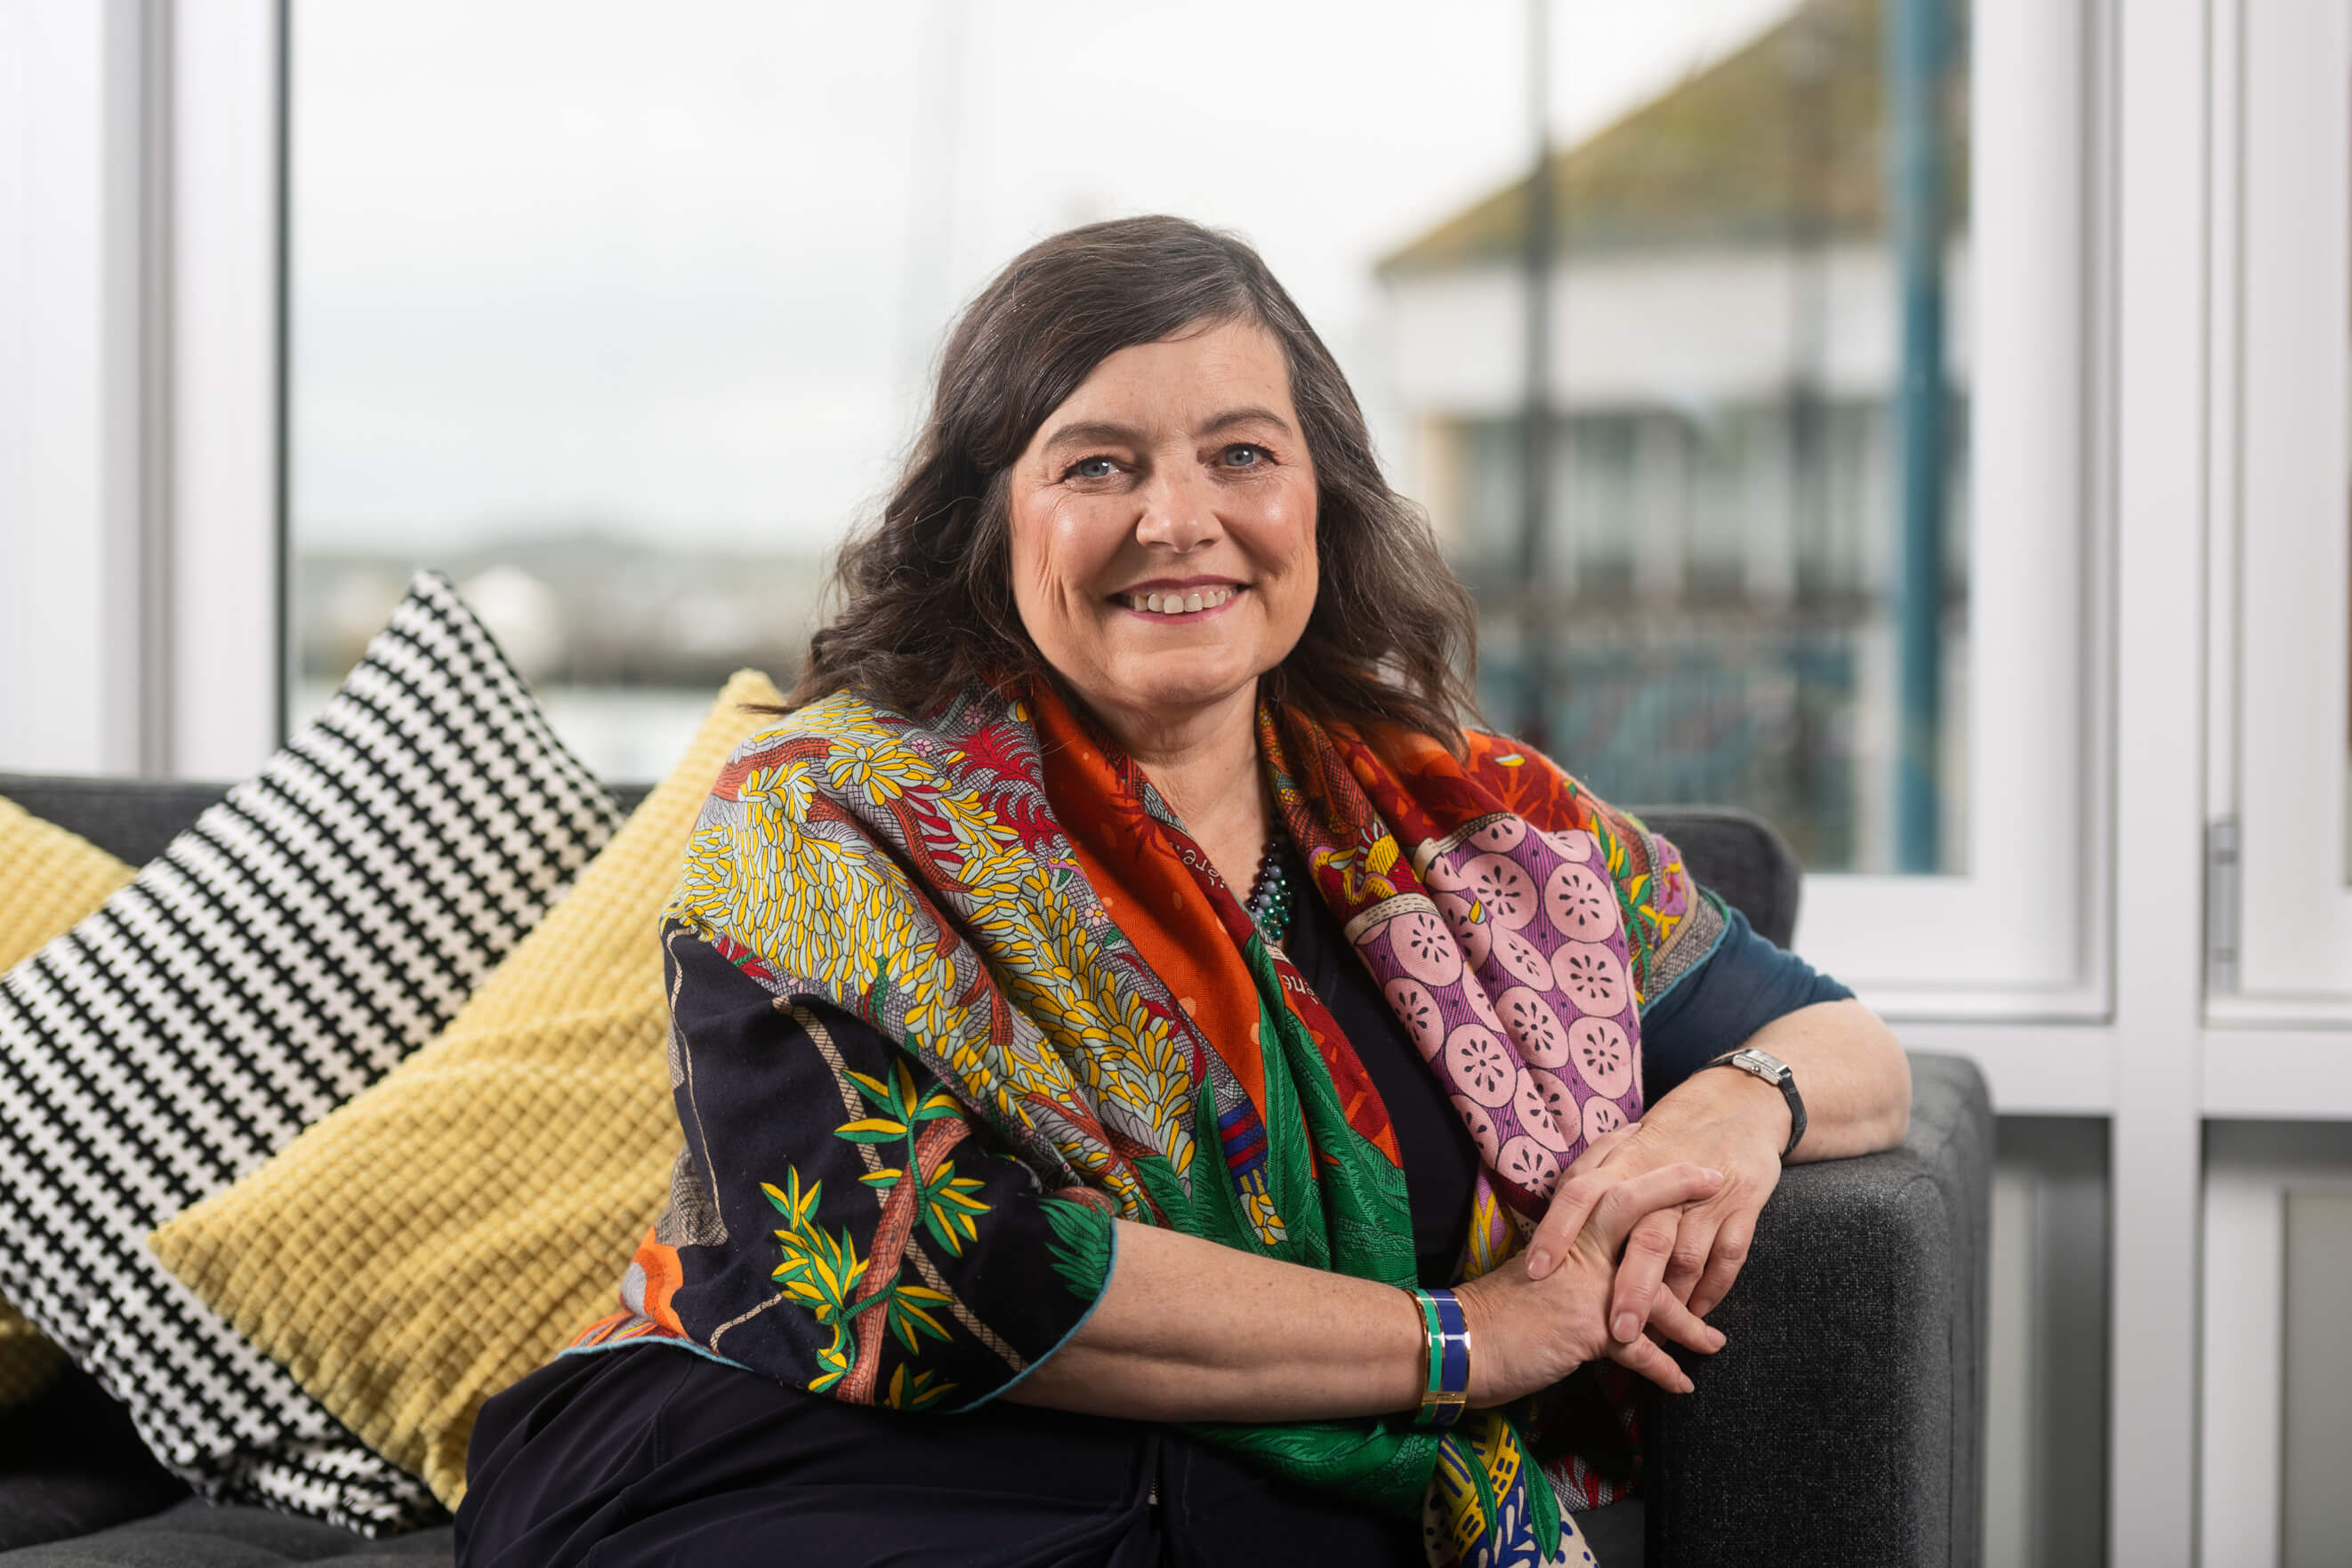 Anne Boden steps down as CEO after pretax profits multiply sixfold to £195m